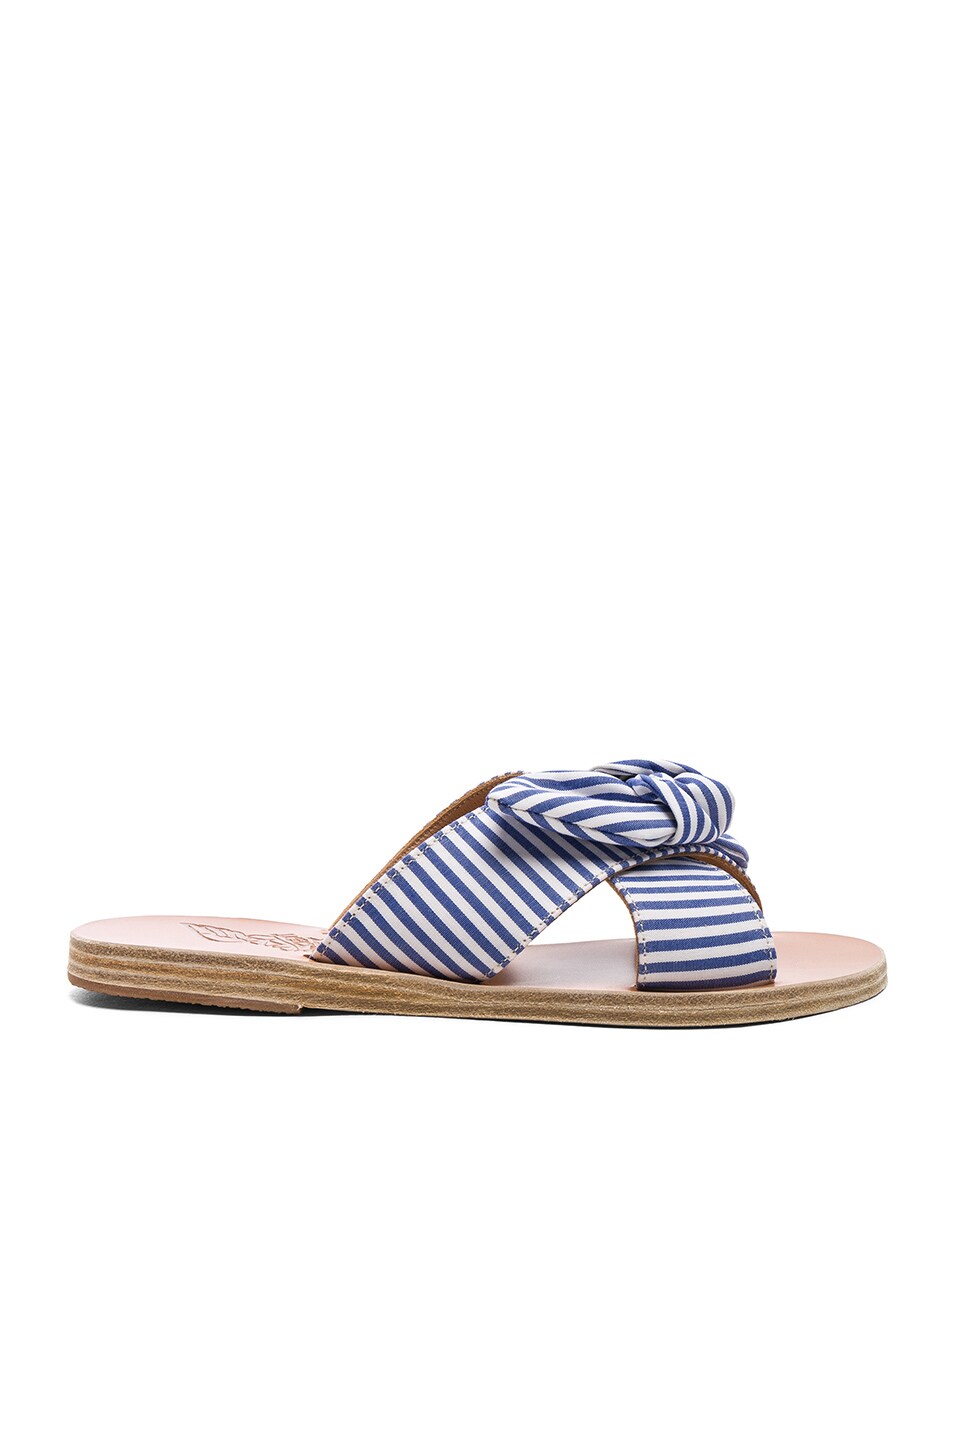 Image 1 of Ancient Greek Sandals Stripe Thais Bow Sandals in Blue Stripes